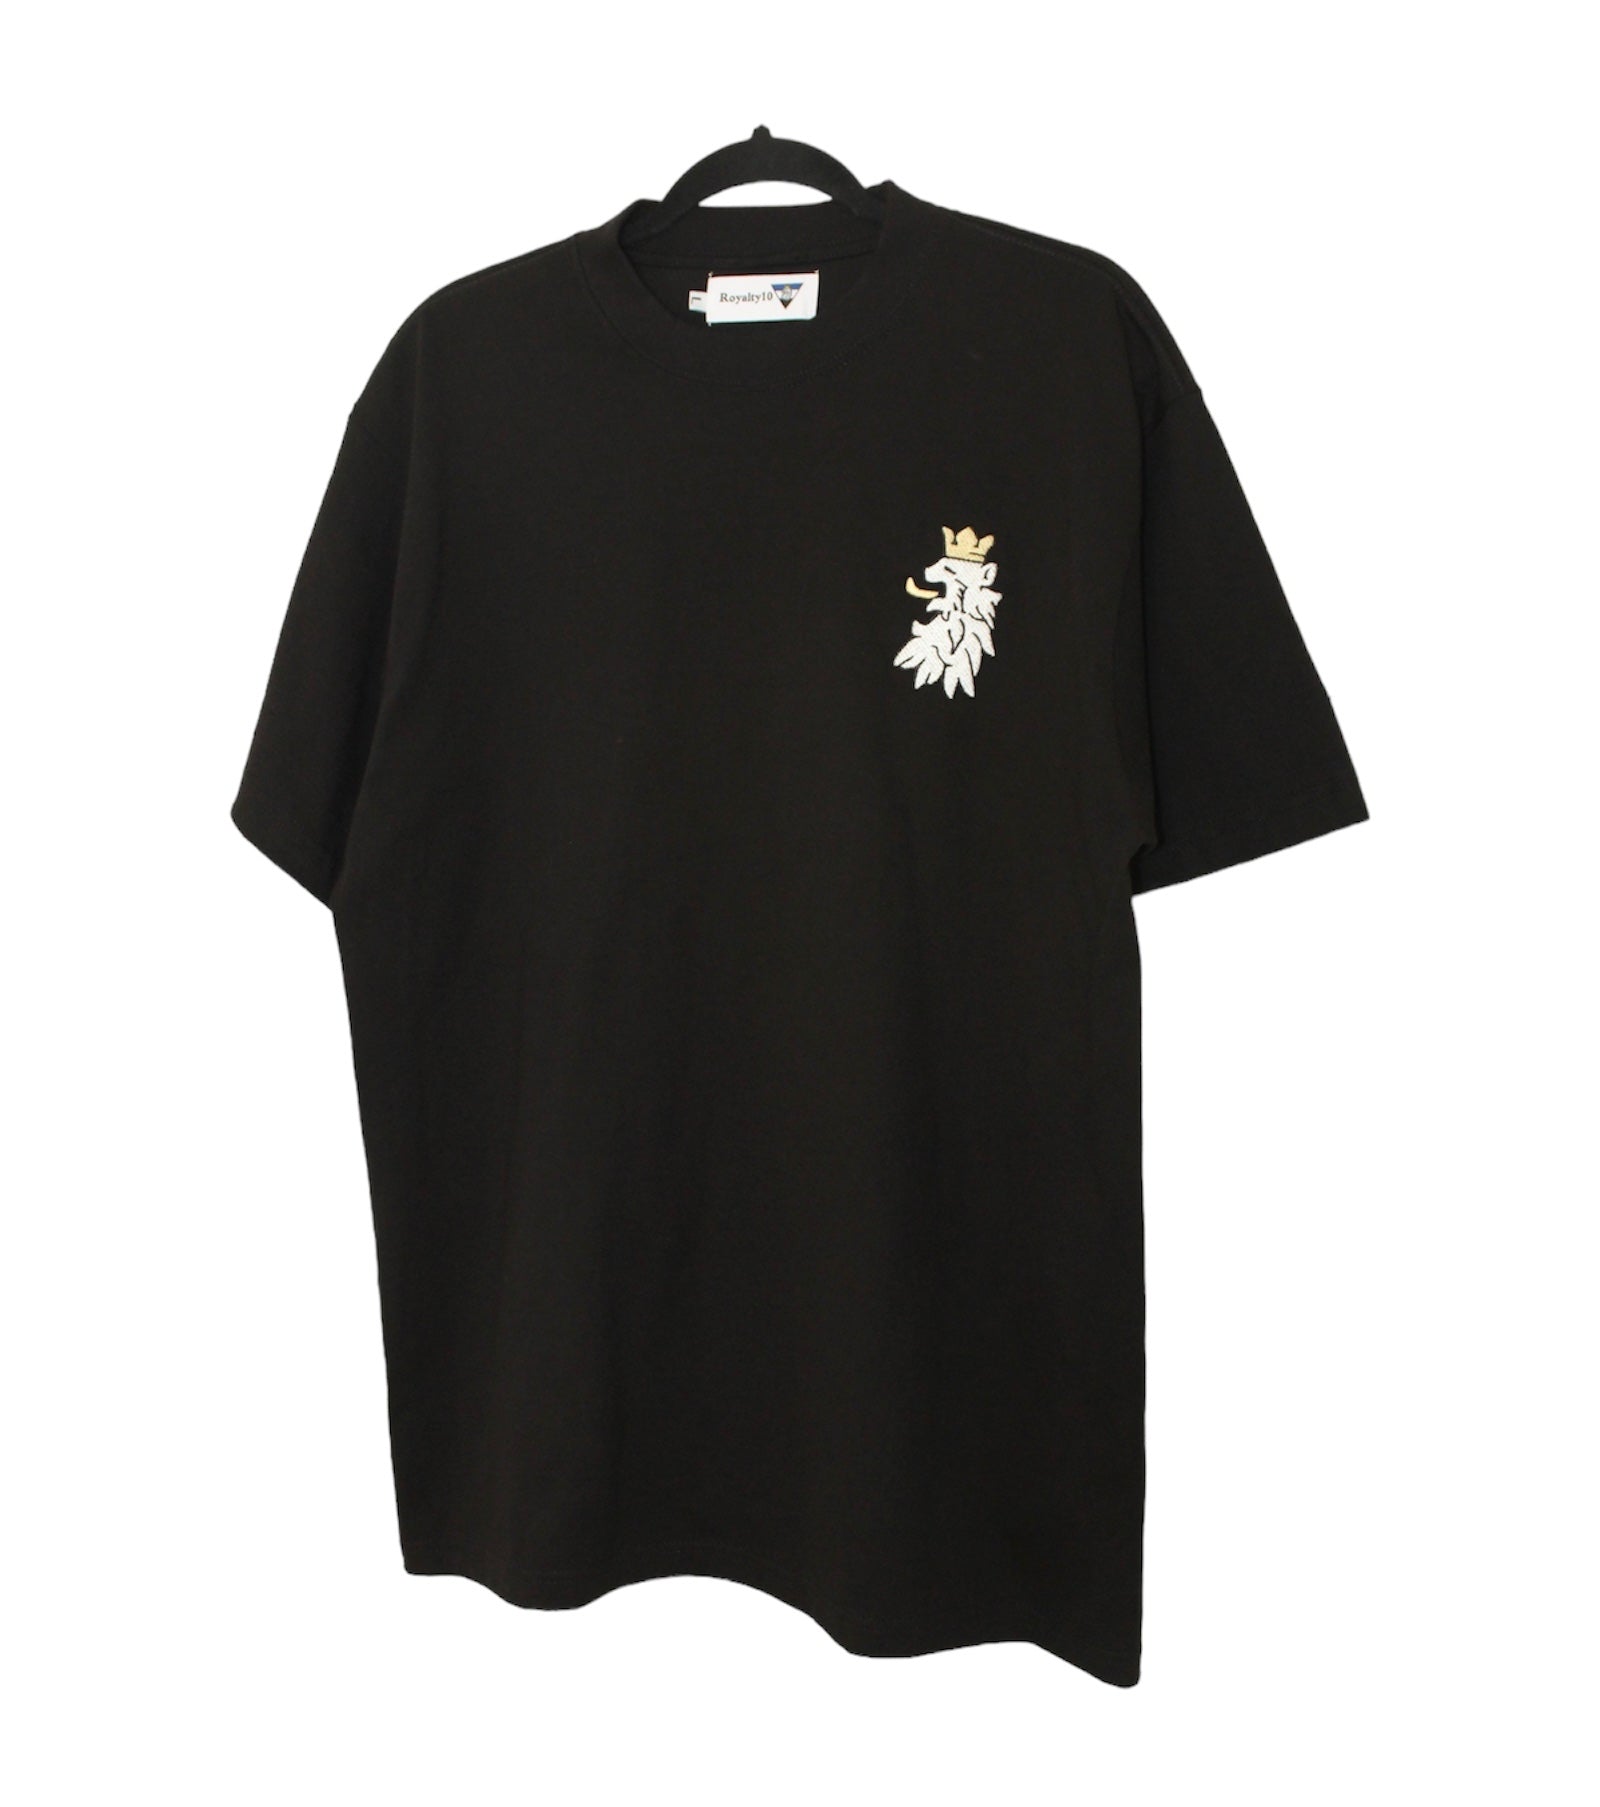 Royalty10 Leão Branco Embroidered Tee in Black: A sleek and stylish black tee from the exclusive Royalty10 collection, showcasing the iconic Leão Branco embroidered logo. This tee exudes sophistication and versatility, making it a wardrobe essential. Embrace a timeless and fashionable look with the Royalty10 Leão Branco Embroidered Tee in black.